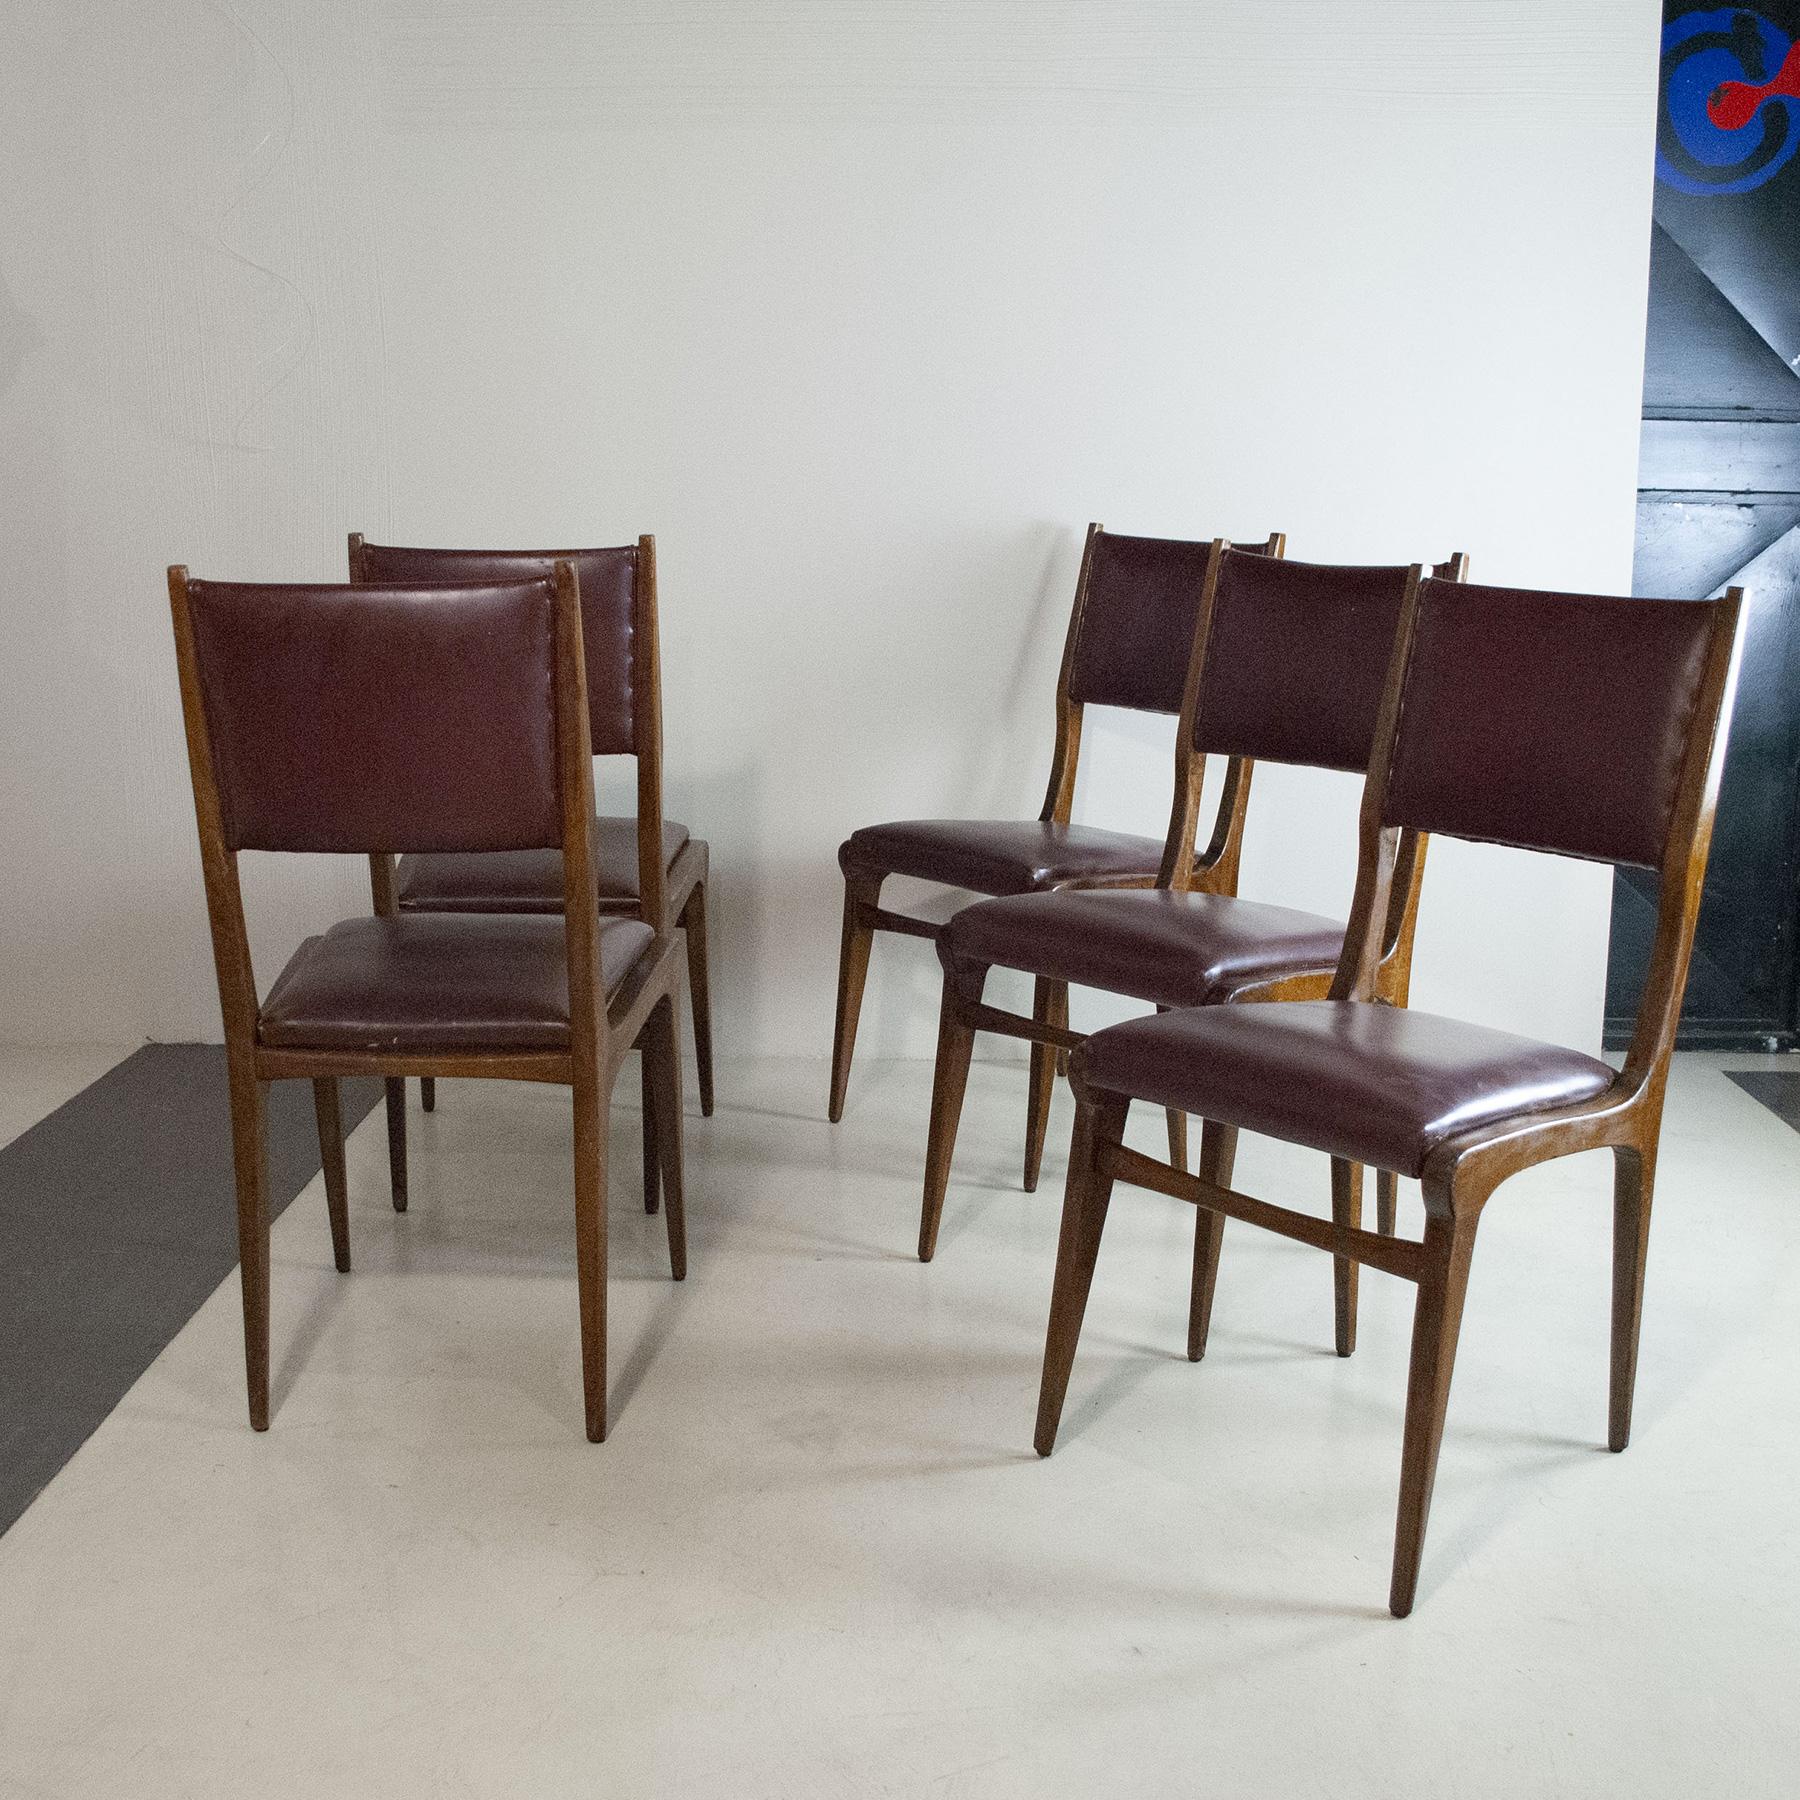 Carlo de Carli in the Style Italian Midcentury Chairs For Sale 4